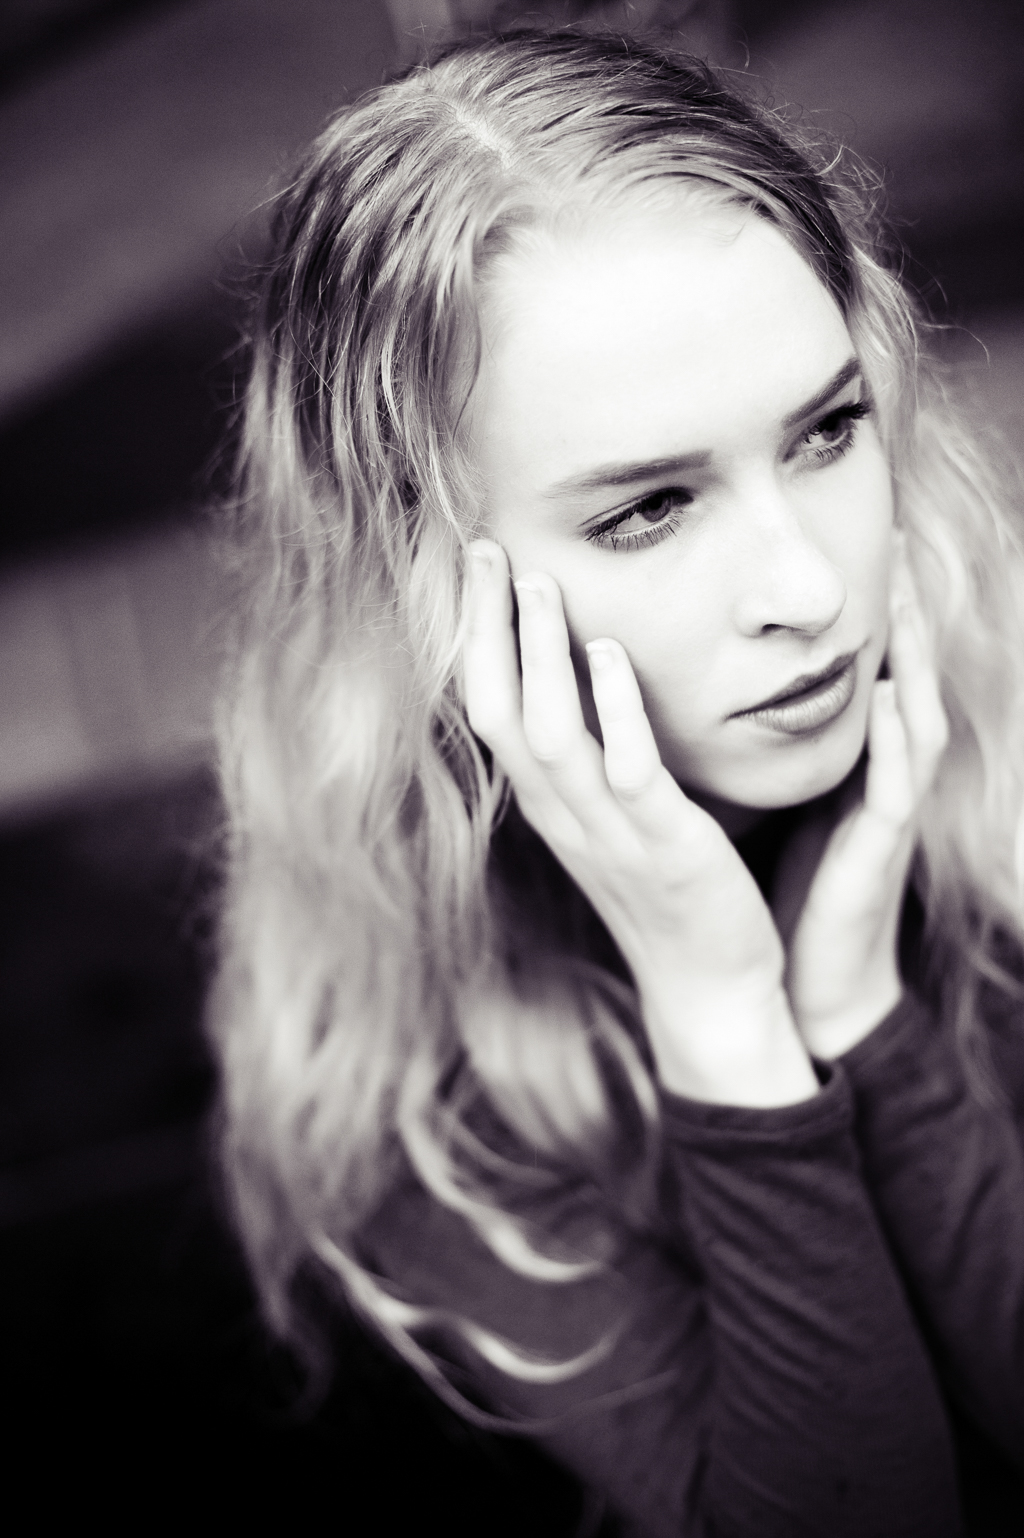 a black and white portrait of a model with long blonde hair holding her cheeks and looking away